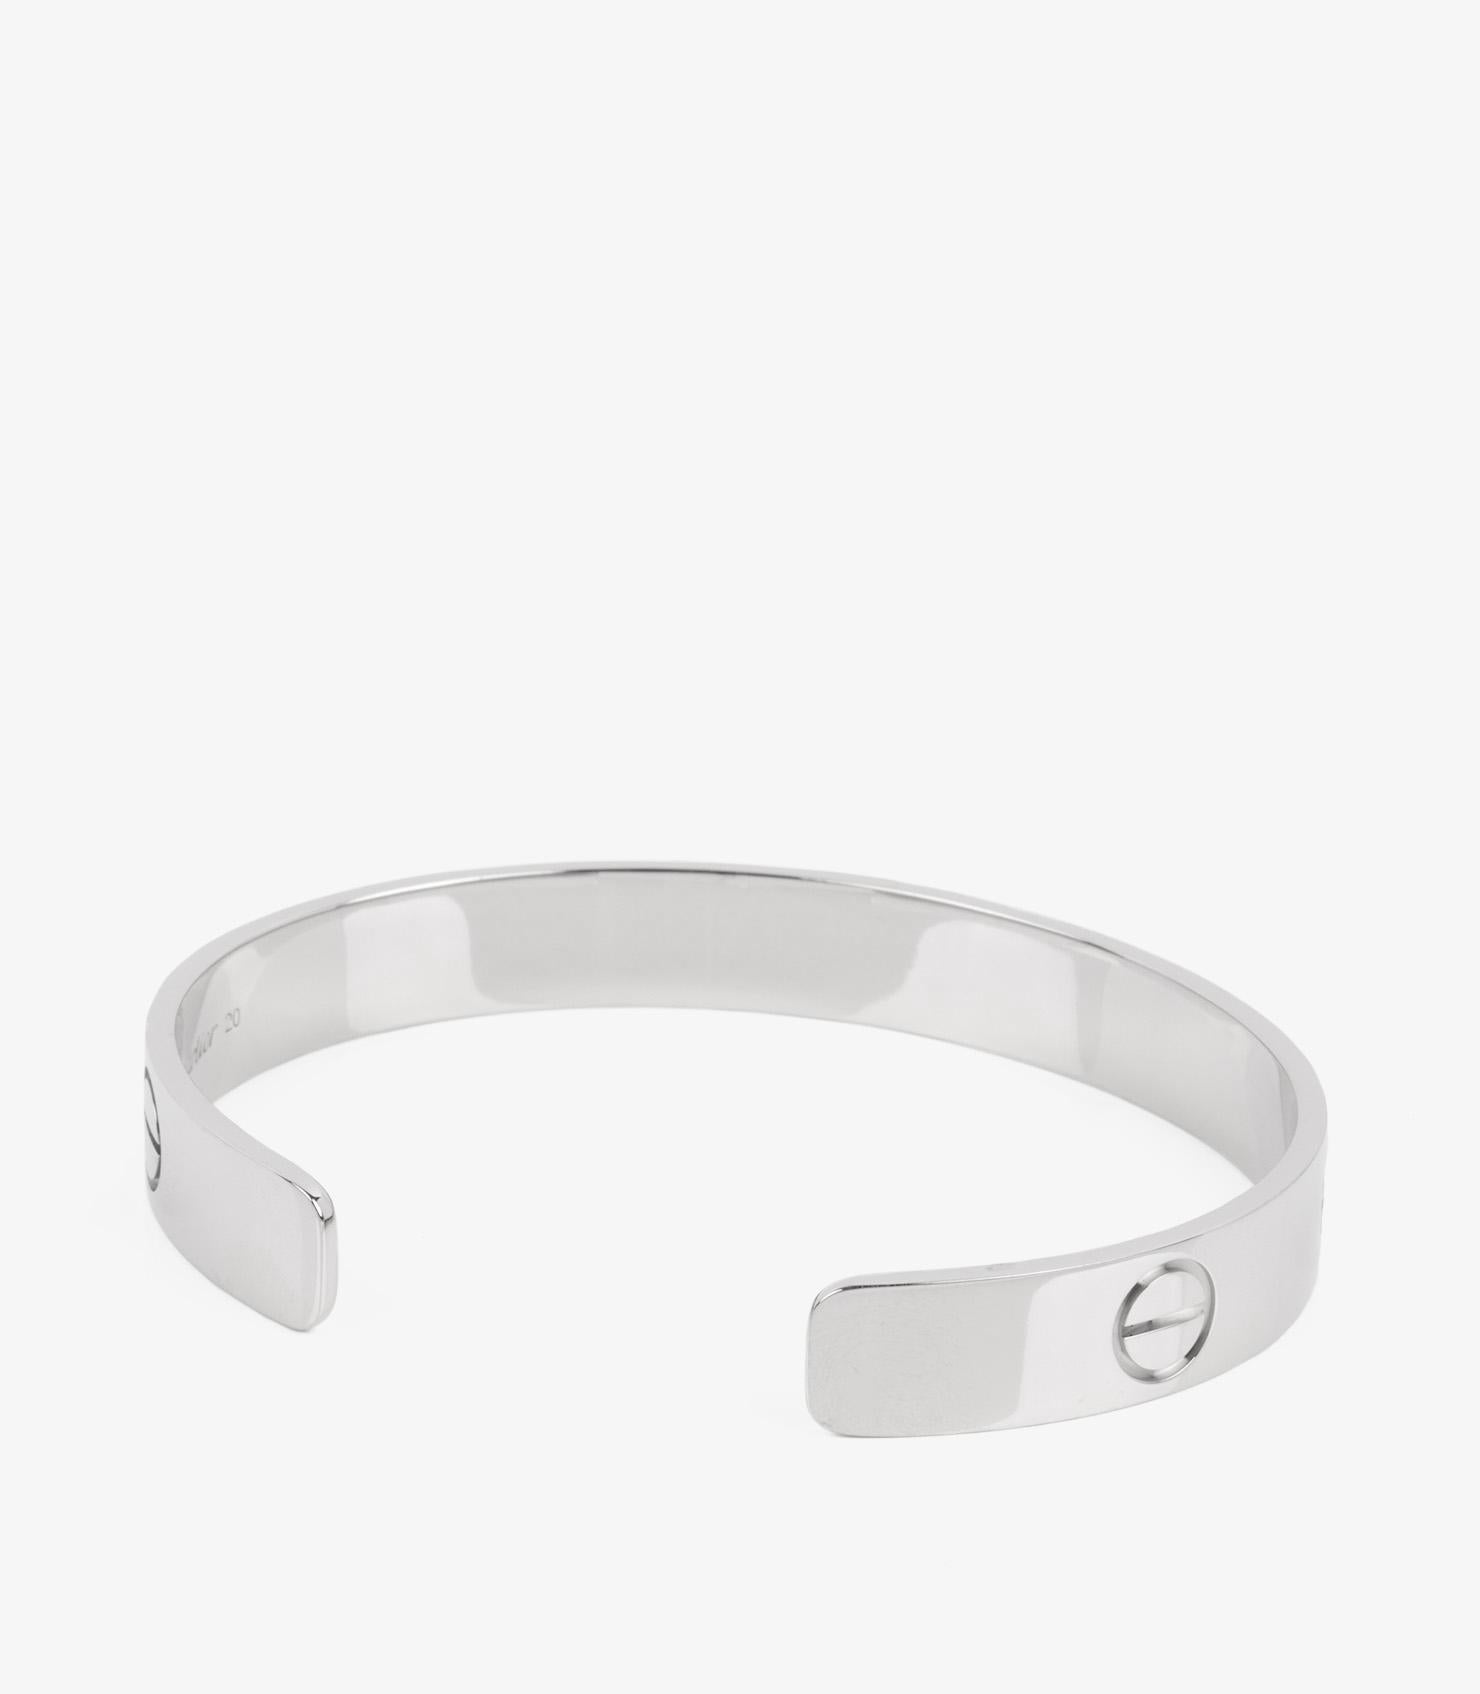 Cartier 18ct White Gold Love LM Cuff Bangle In Excellent Condition For Sale In Bishop's Stortford, Hertfordshire